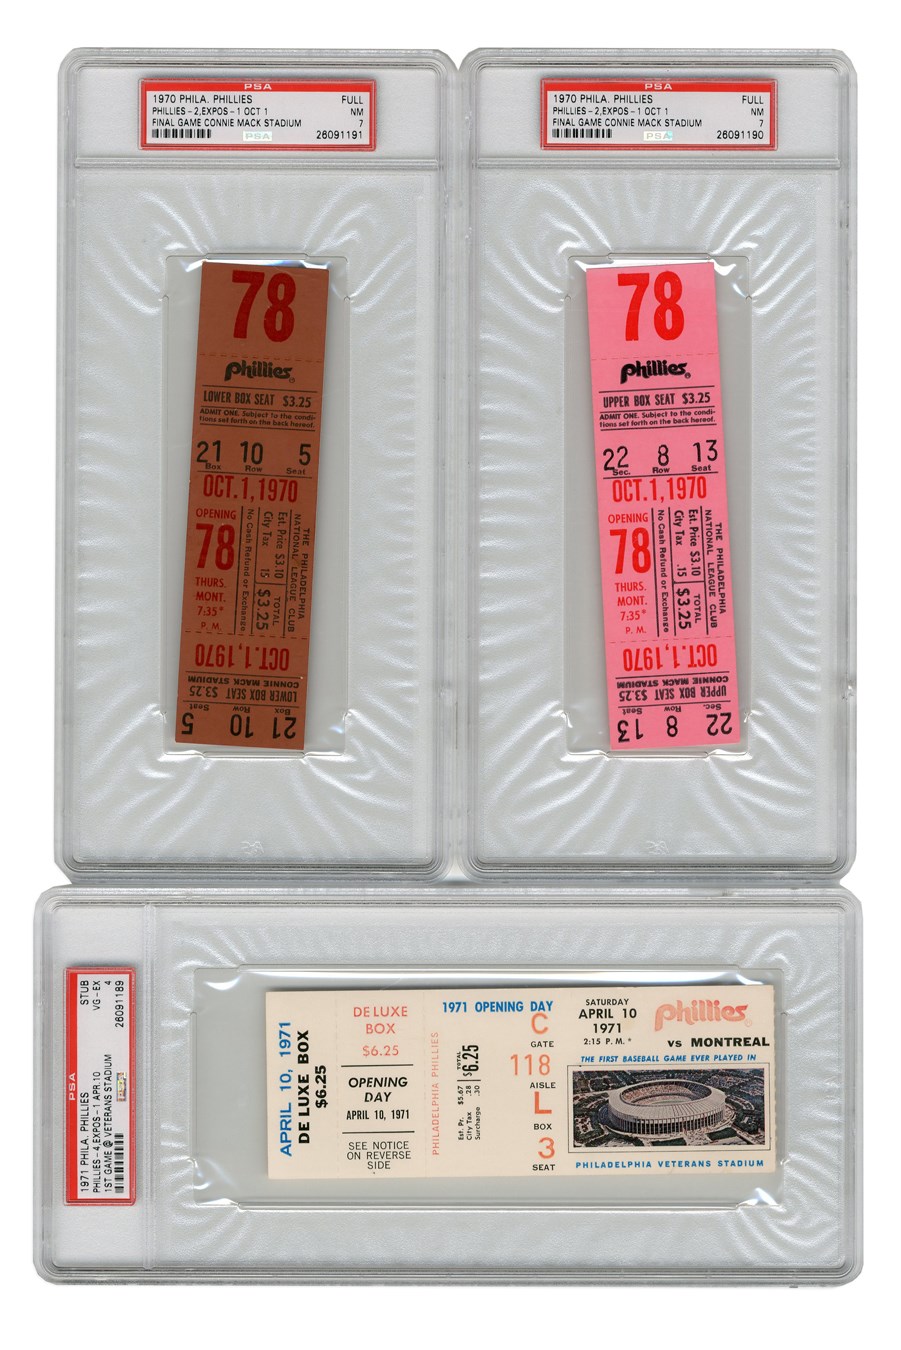 - High Grade 1970 & 1971 First & Last Games at Connie Mack & Veterans Stadiums Full Tickets PSA/DNA 7 (3 pieces)